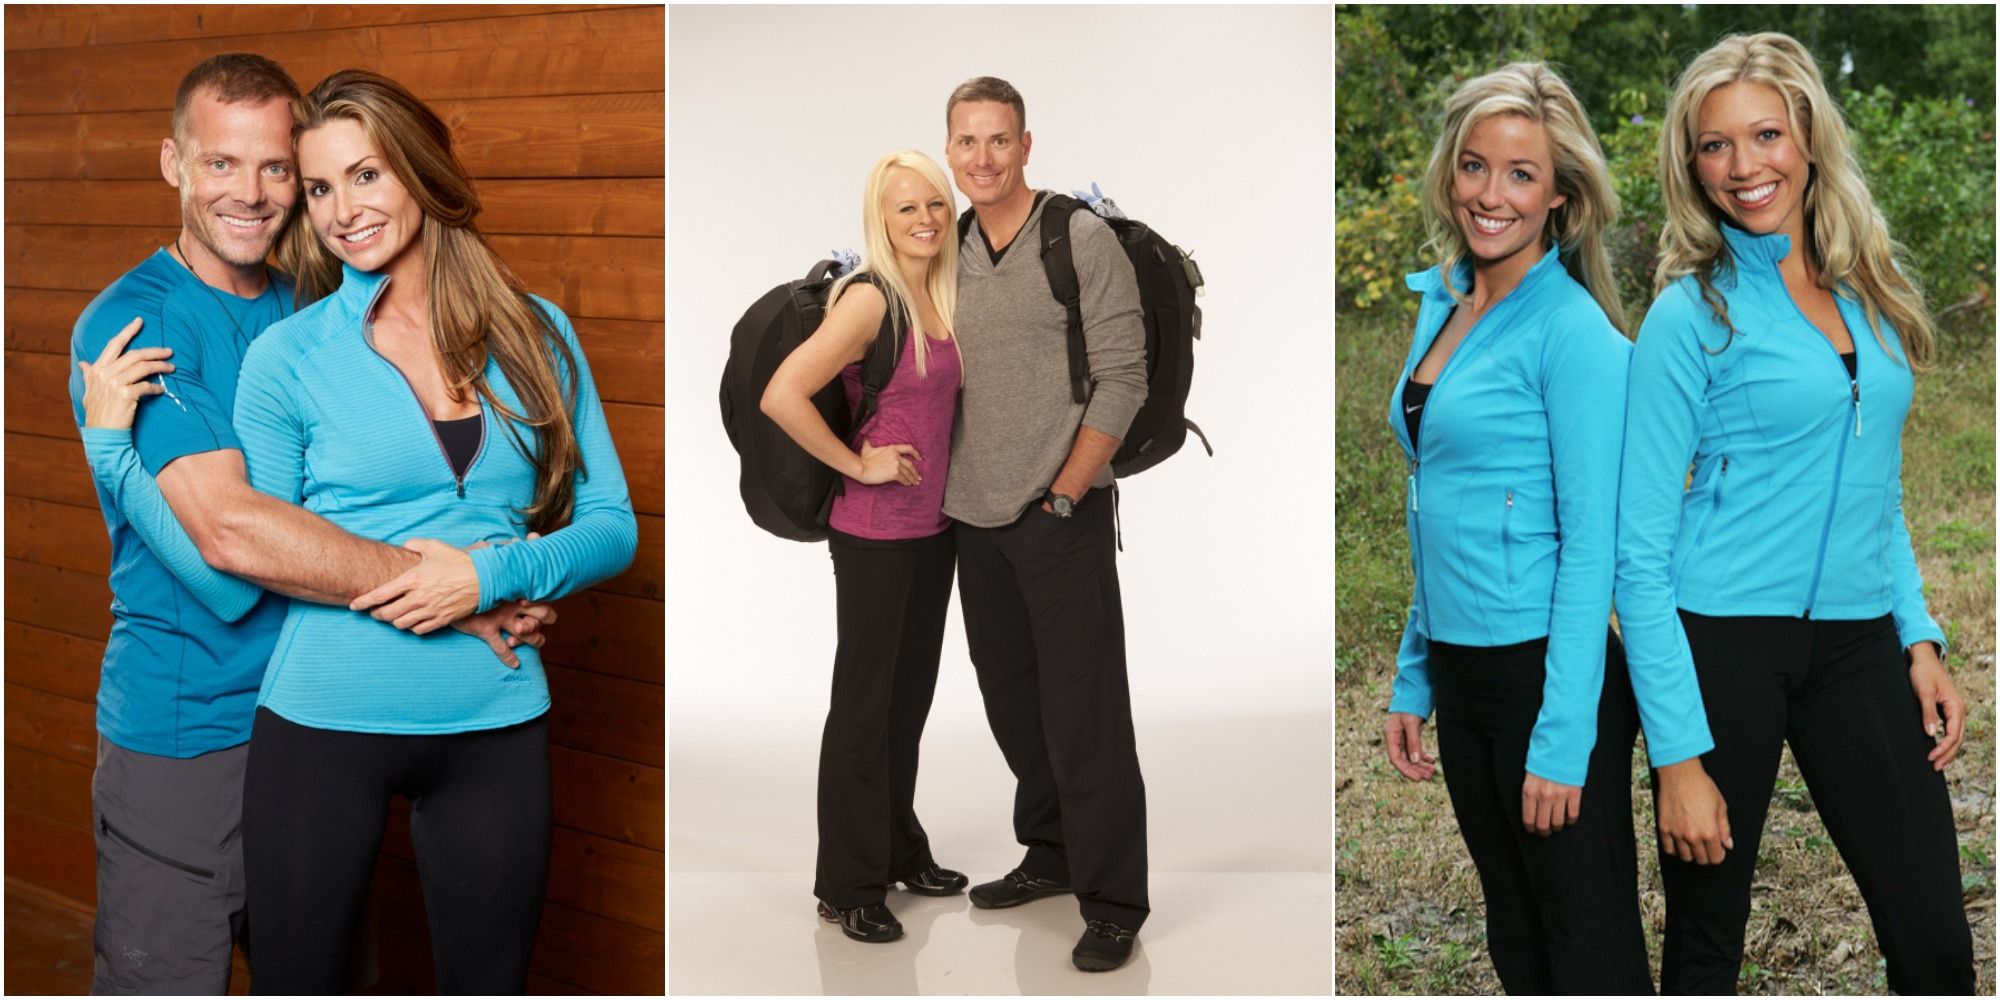 The Amazing Race The 11 Most Dominant Teams Ranked By Leg Wins